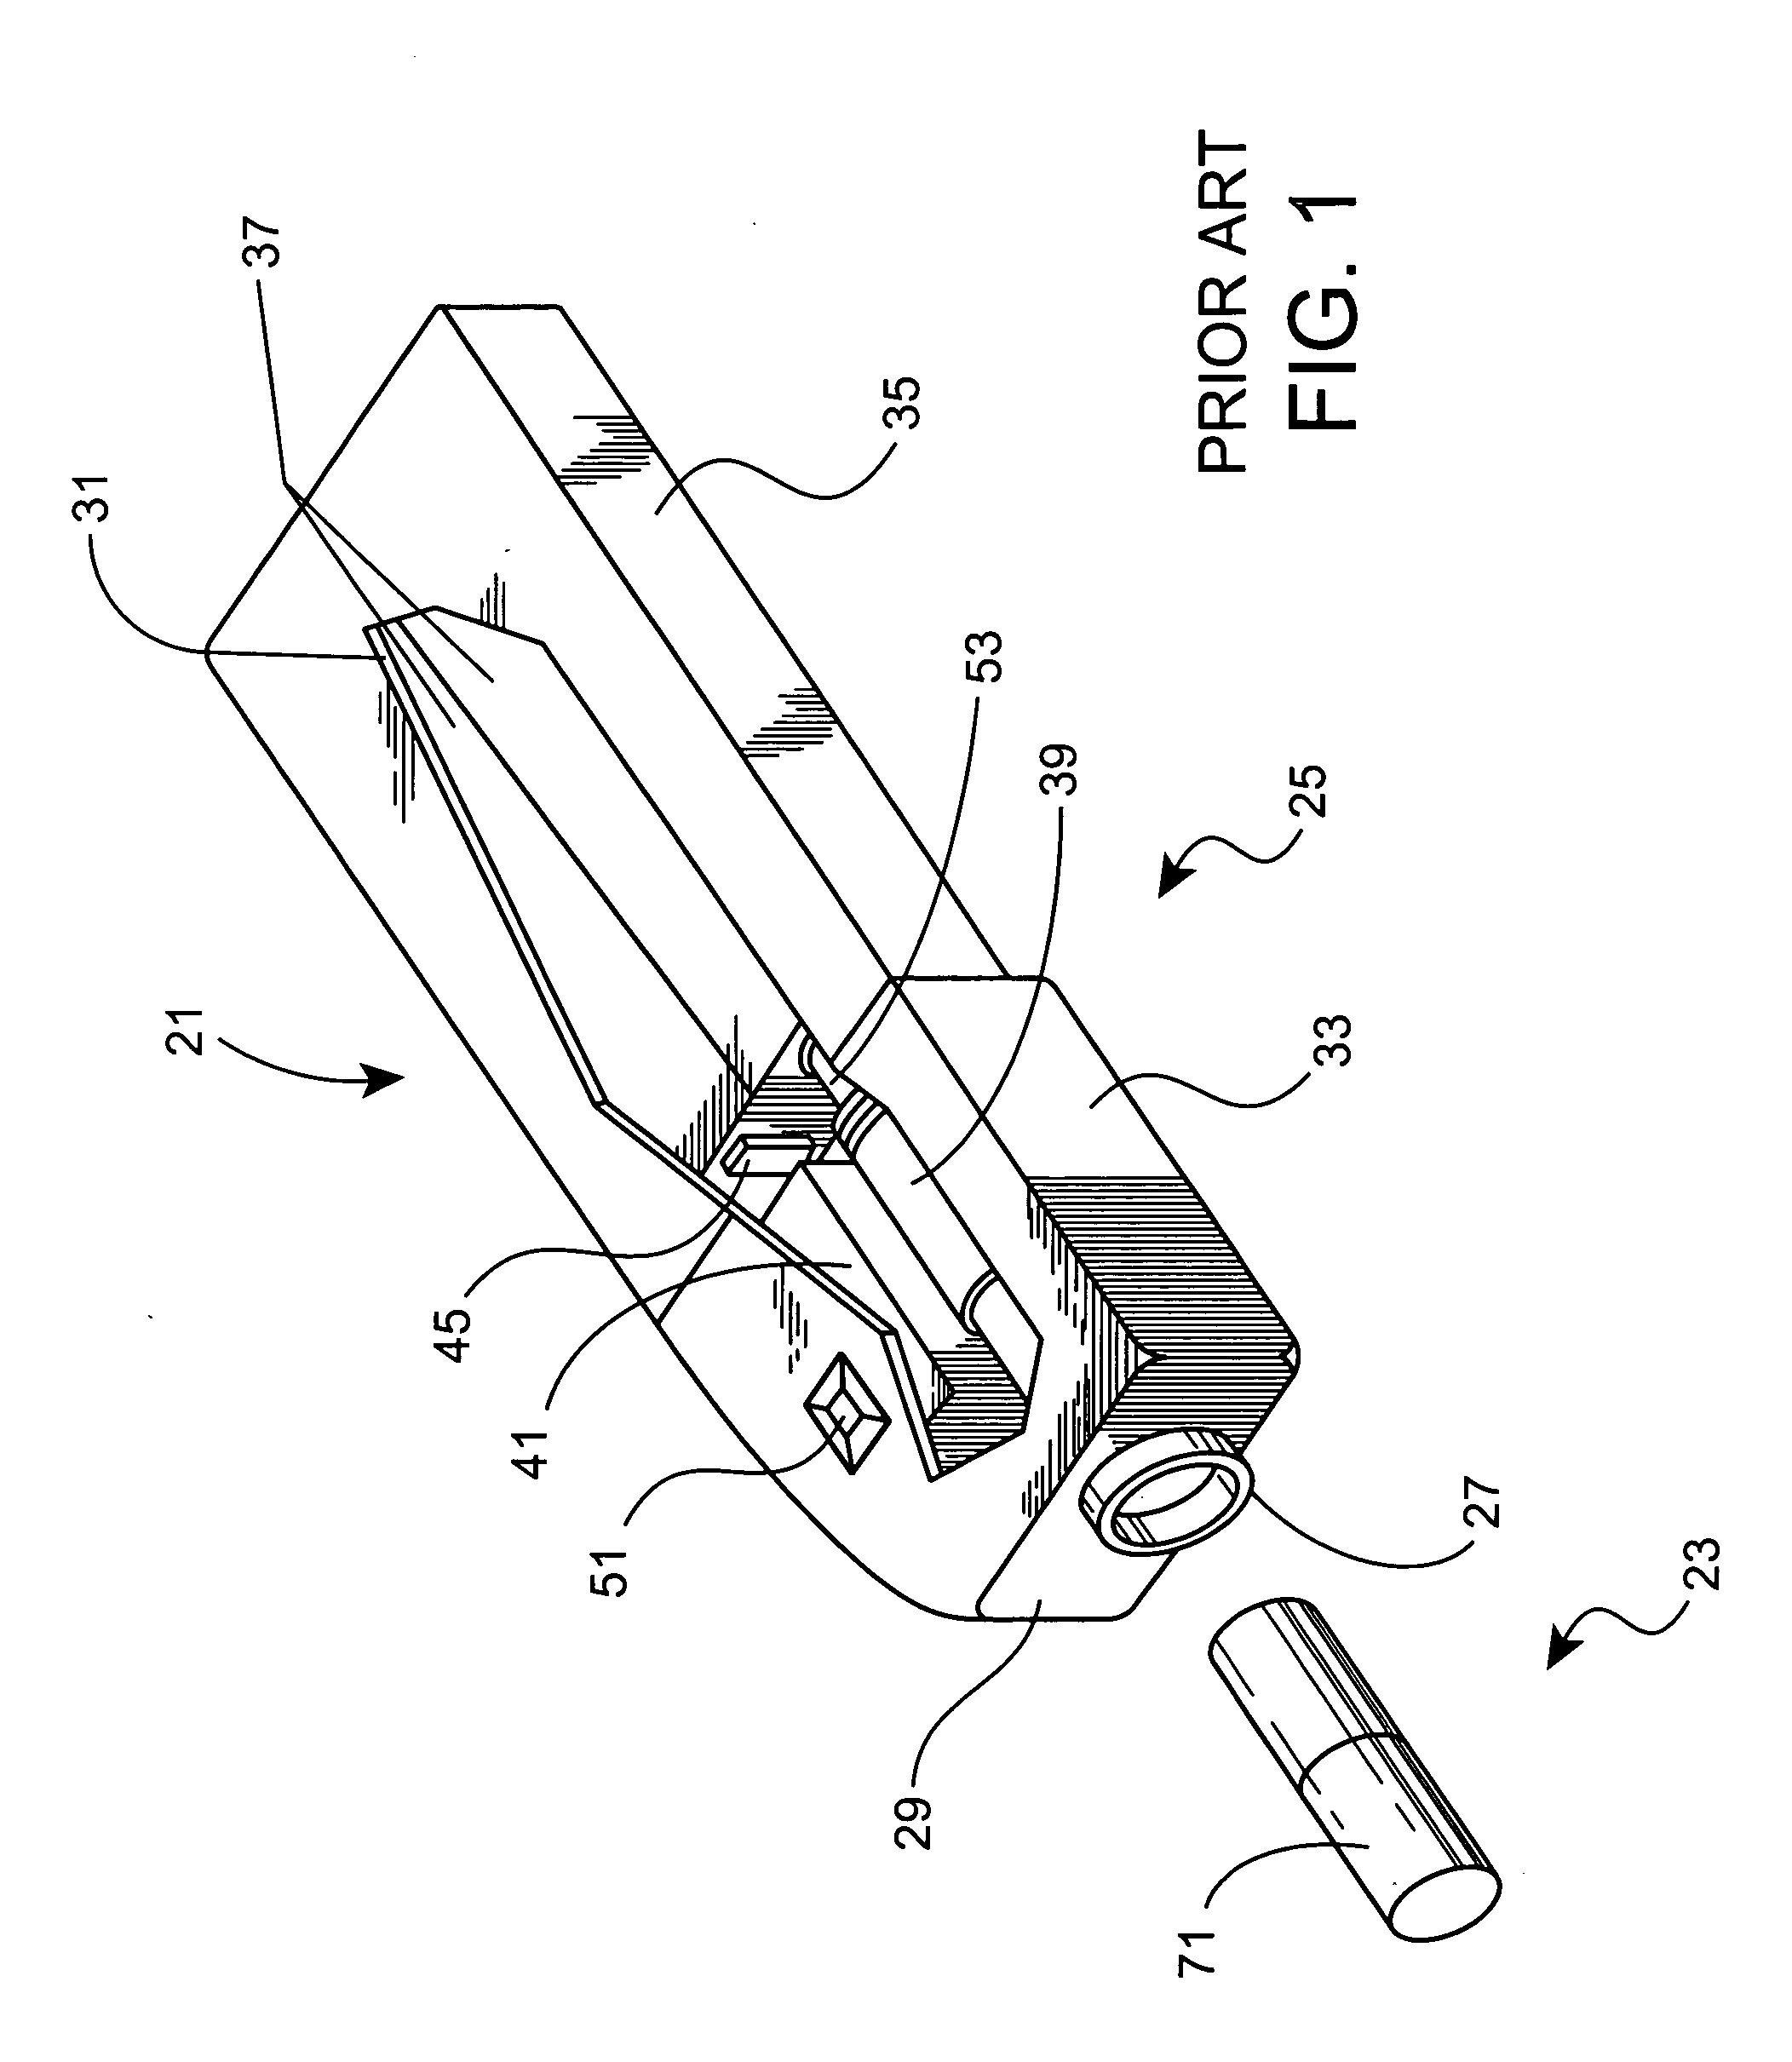 Flow distributor of an electrically heated cigarette smoking system